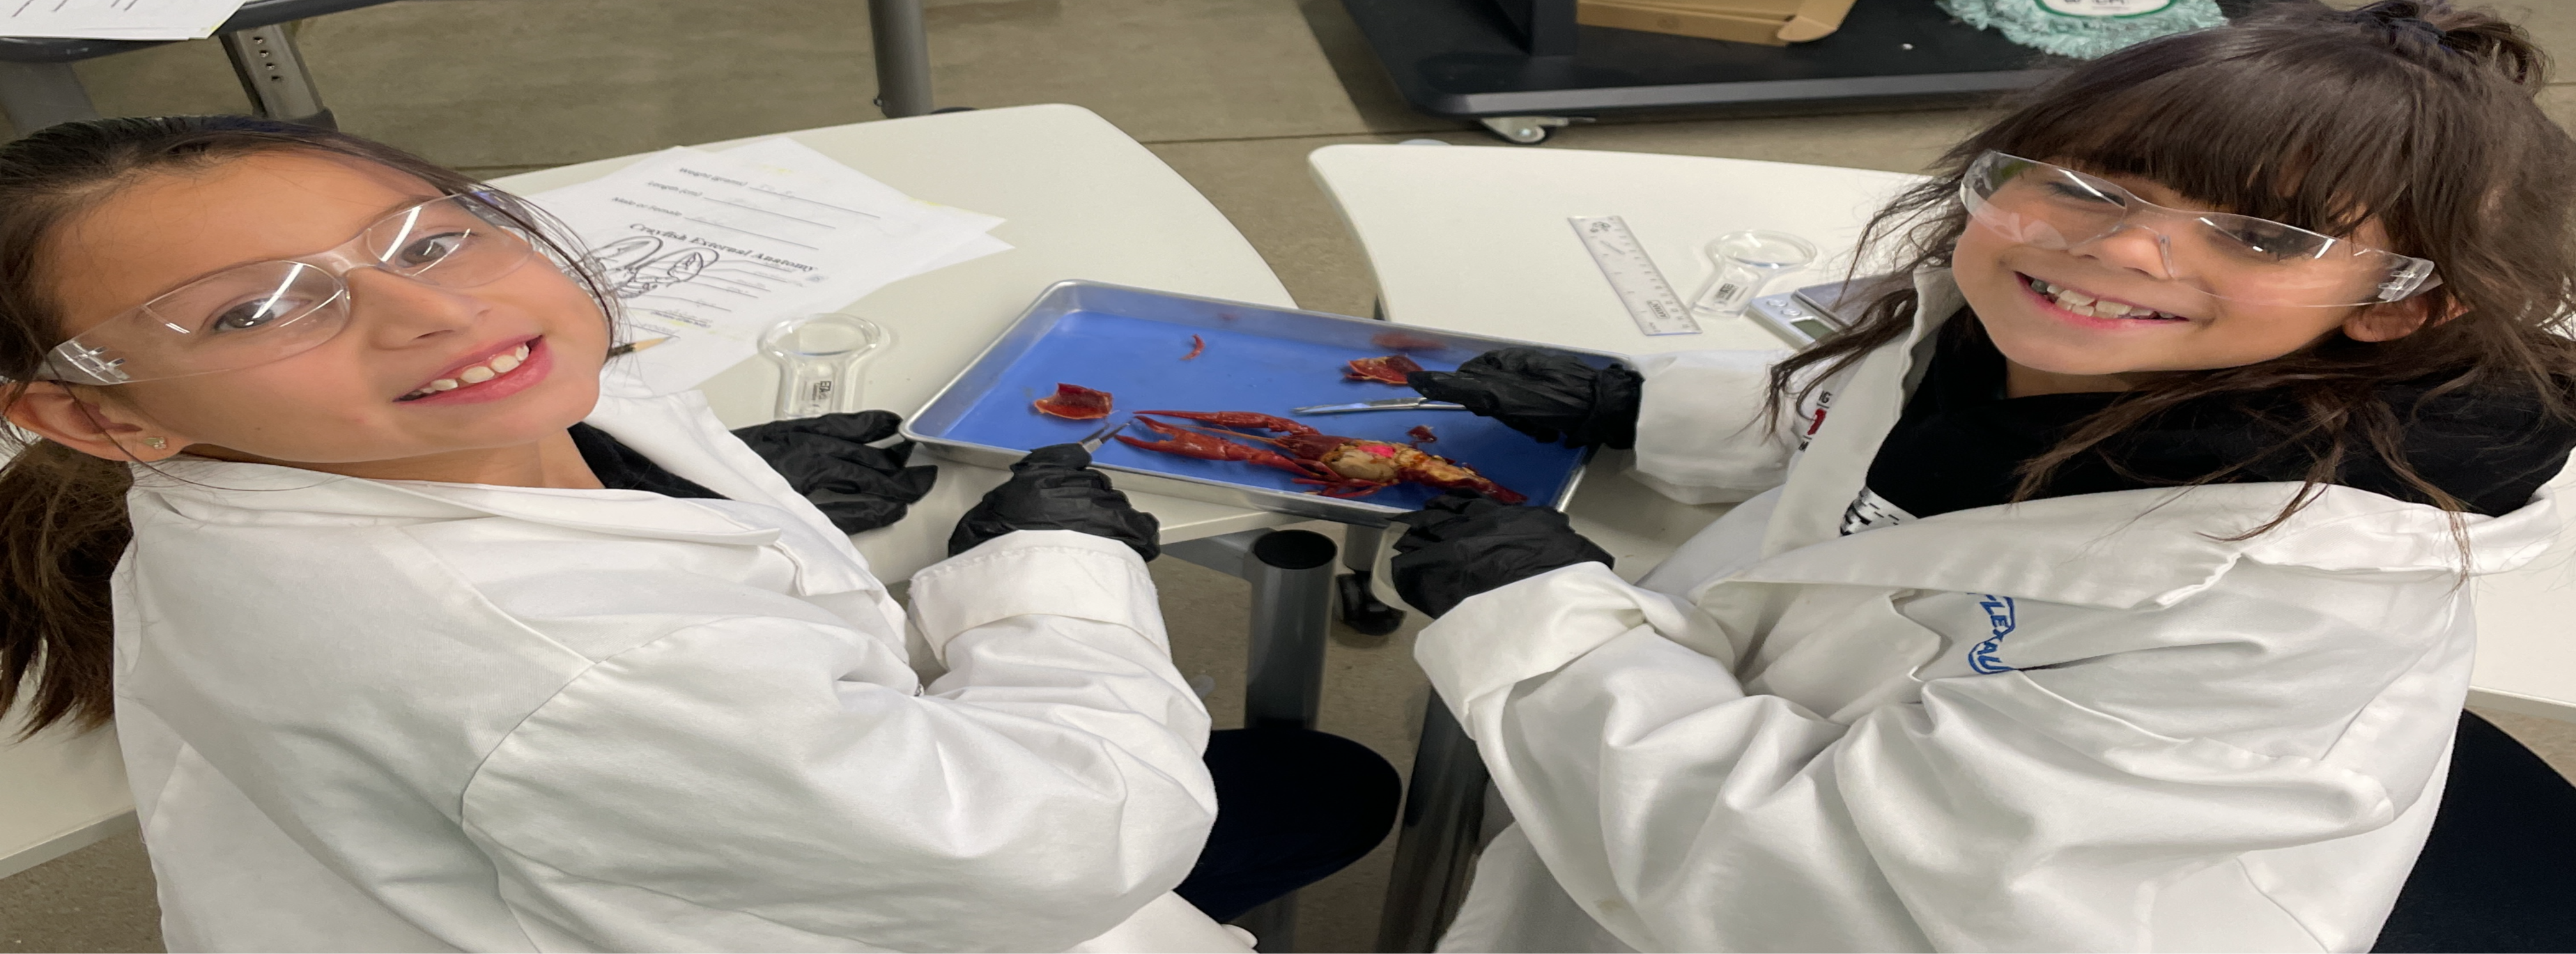 Students dissecting a crawfish